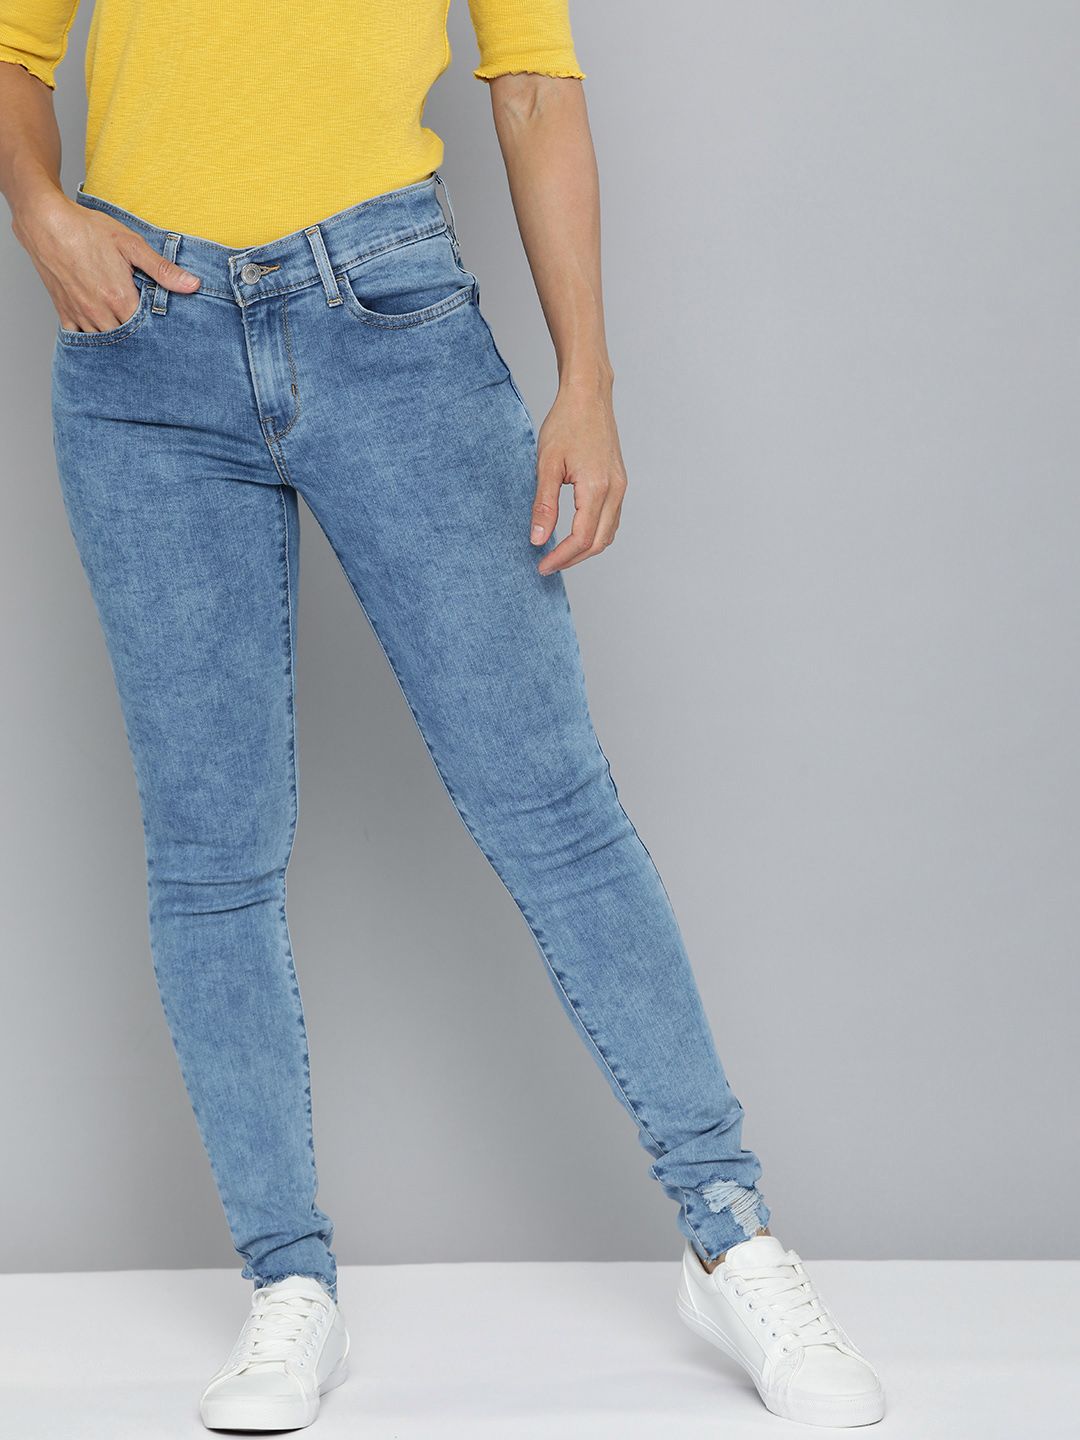 Levis Women Blue 710 Super Skinny Fit High-Rise Light Fade Stretchable Jeans Price in India